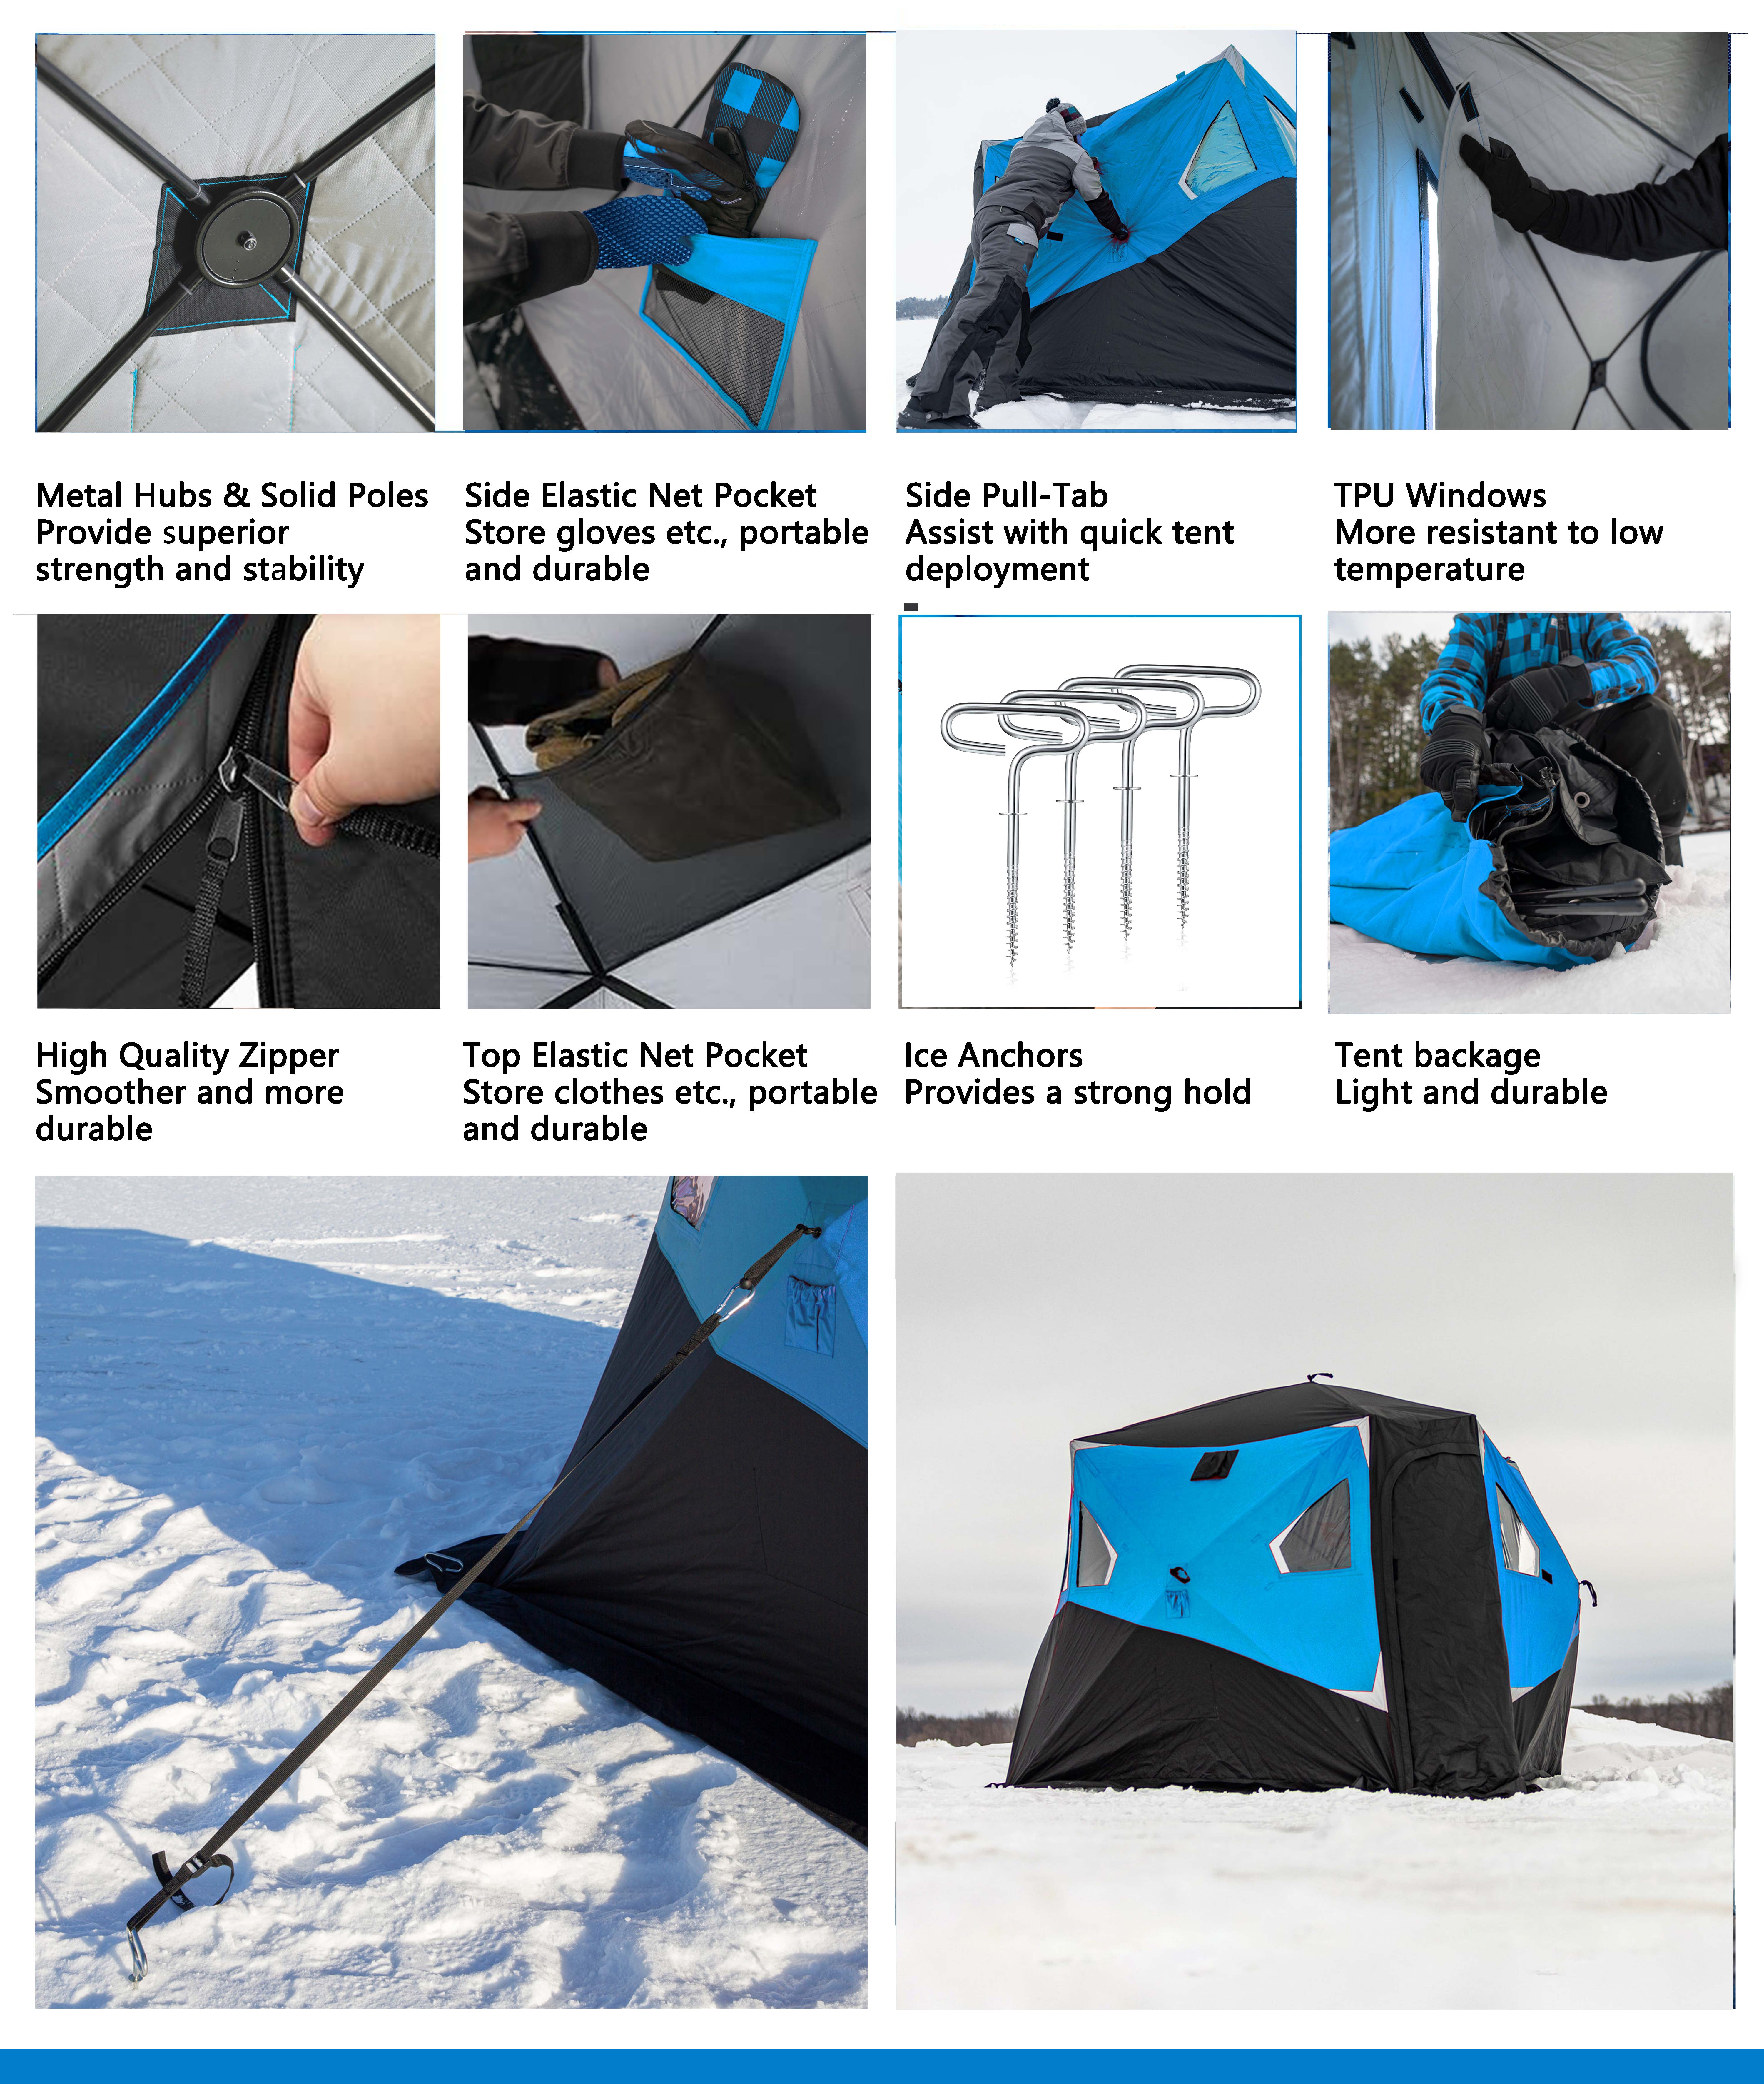 Winter Ice fishing tent details 8